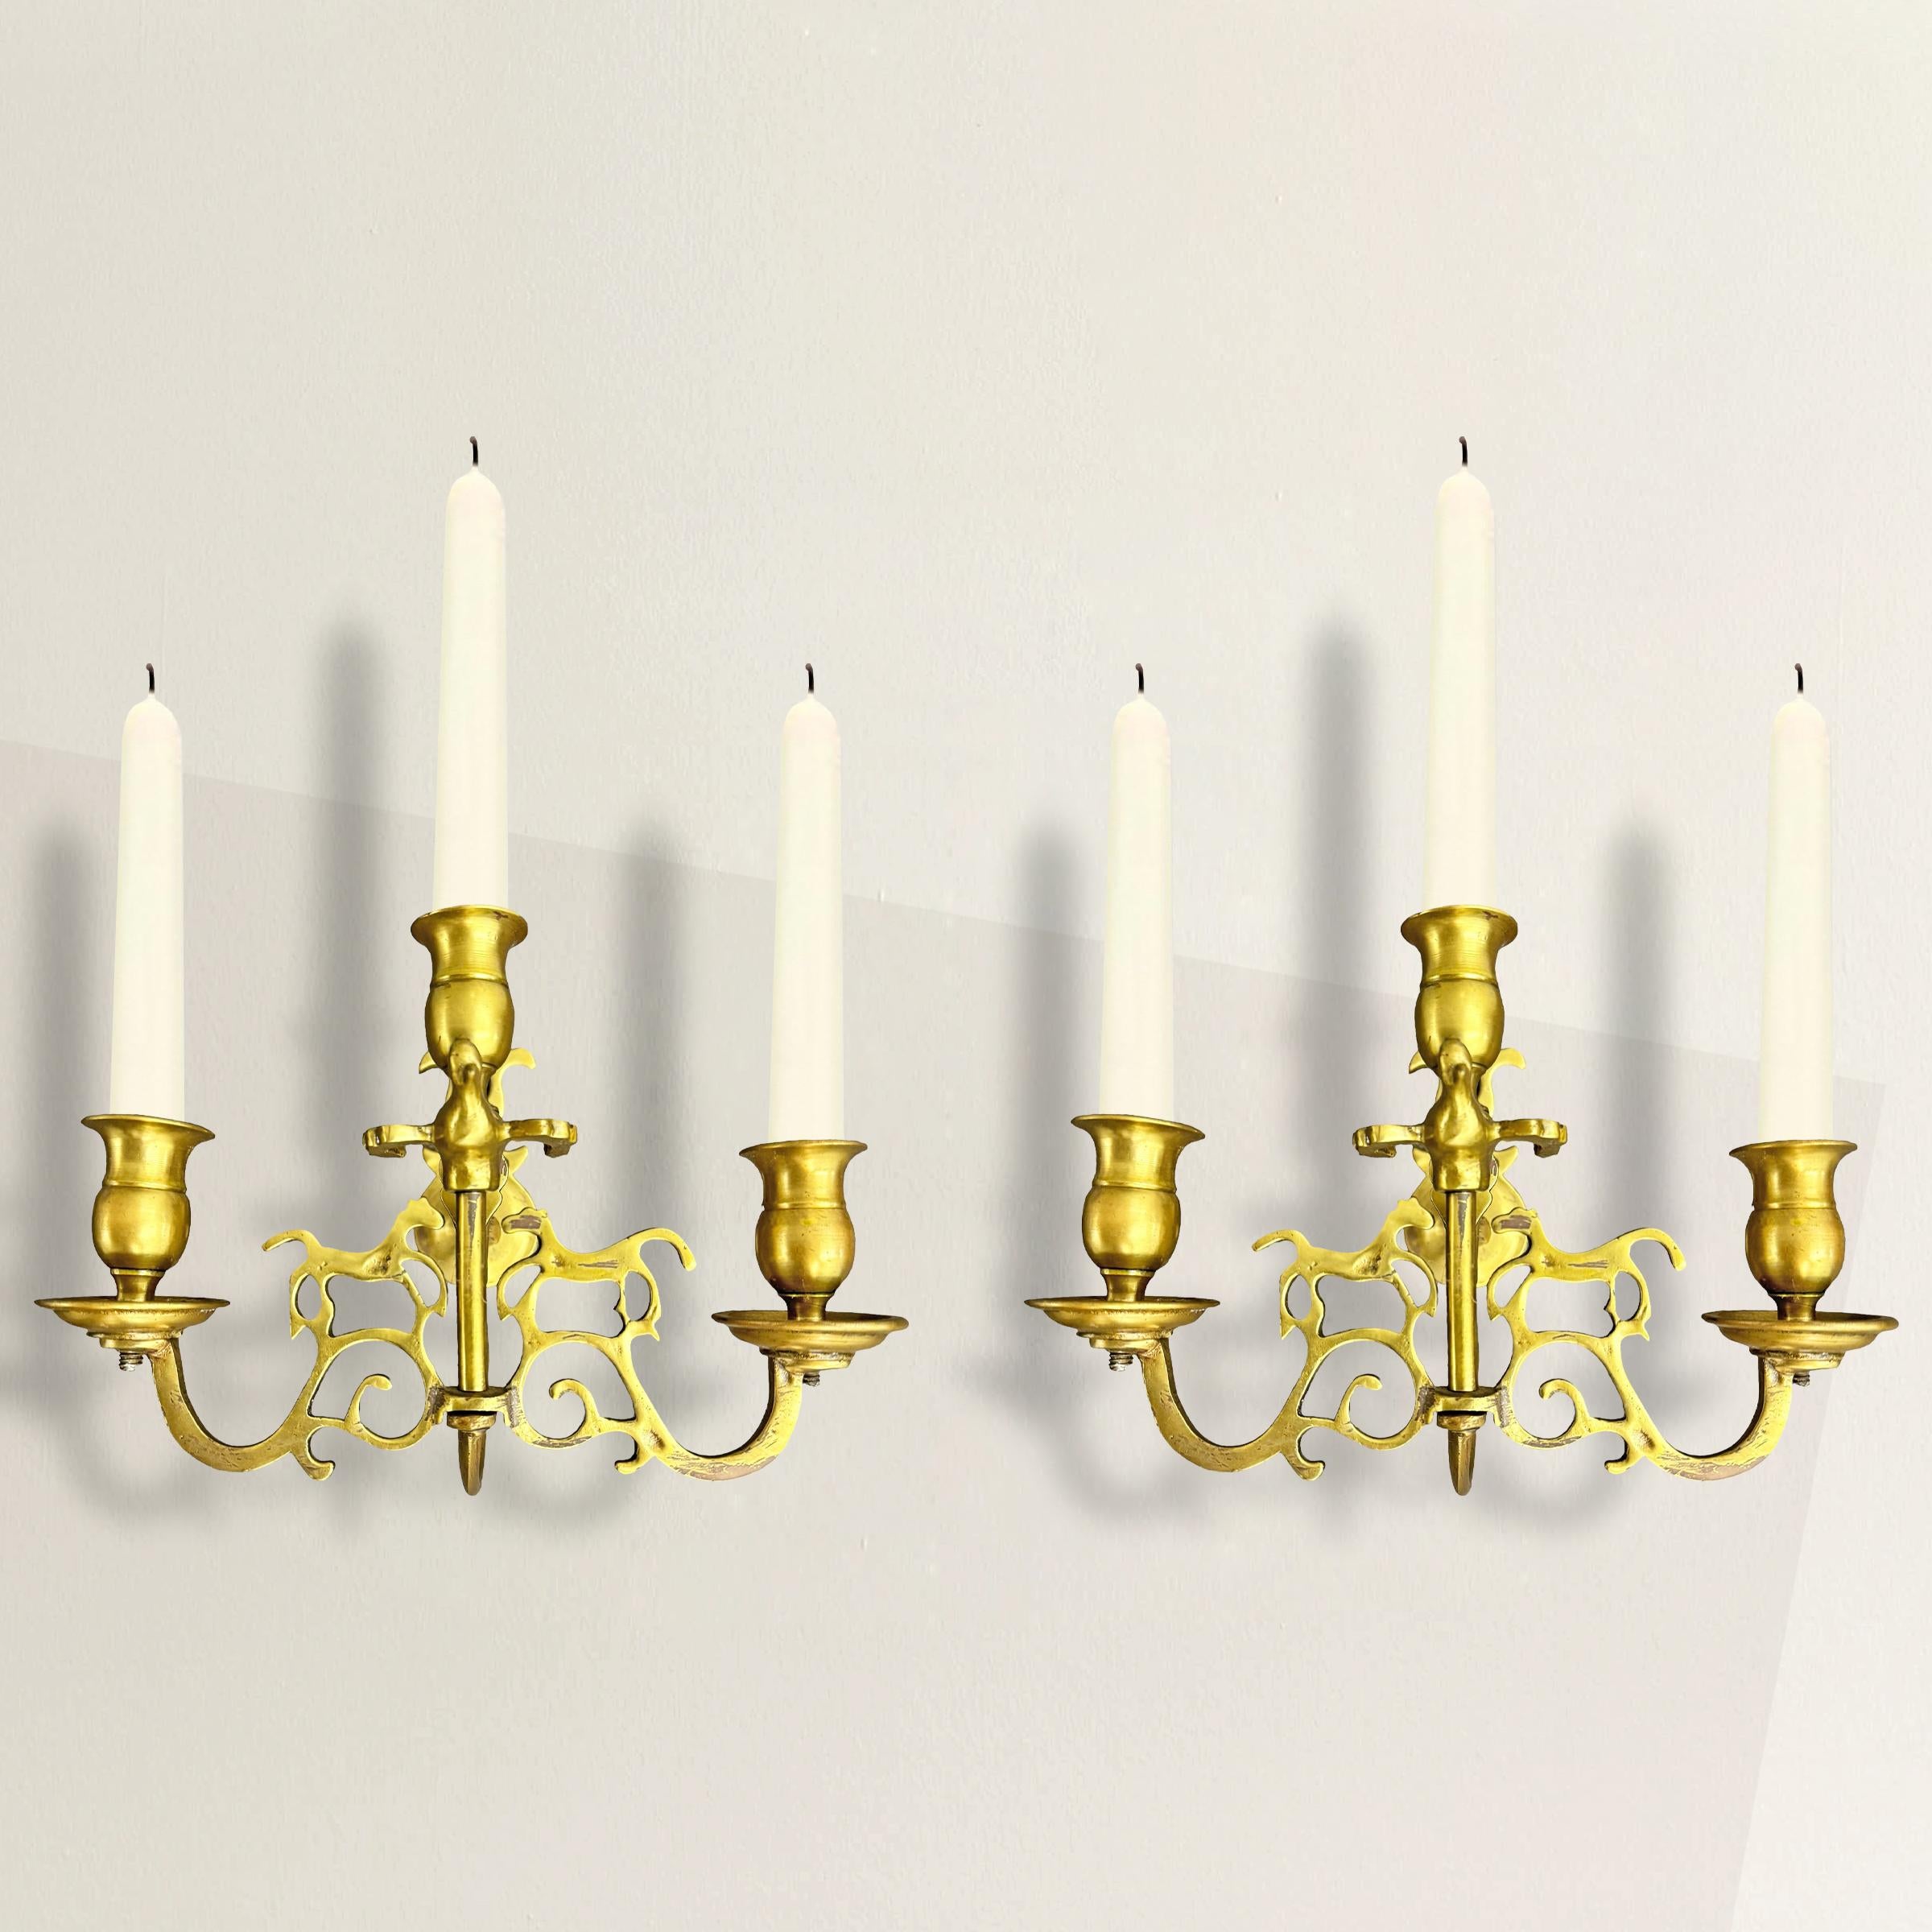 This exquisite pair of 18th-century English Georgian brass three-arm candle sconces embodies the elegance and ornamental richness of the Georgian period (1714-1830). Each sconce features a meticulously crafted pair of galloping horses facing each